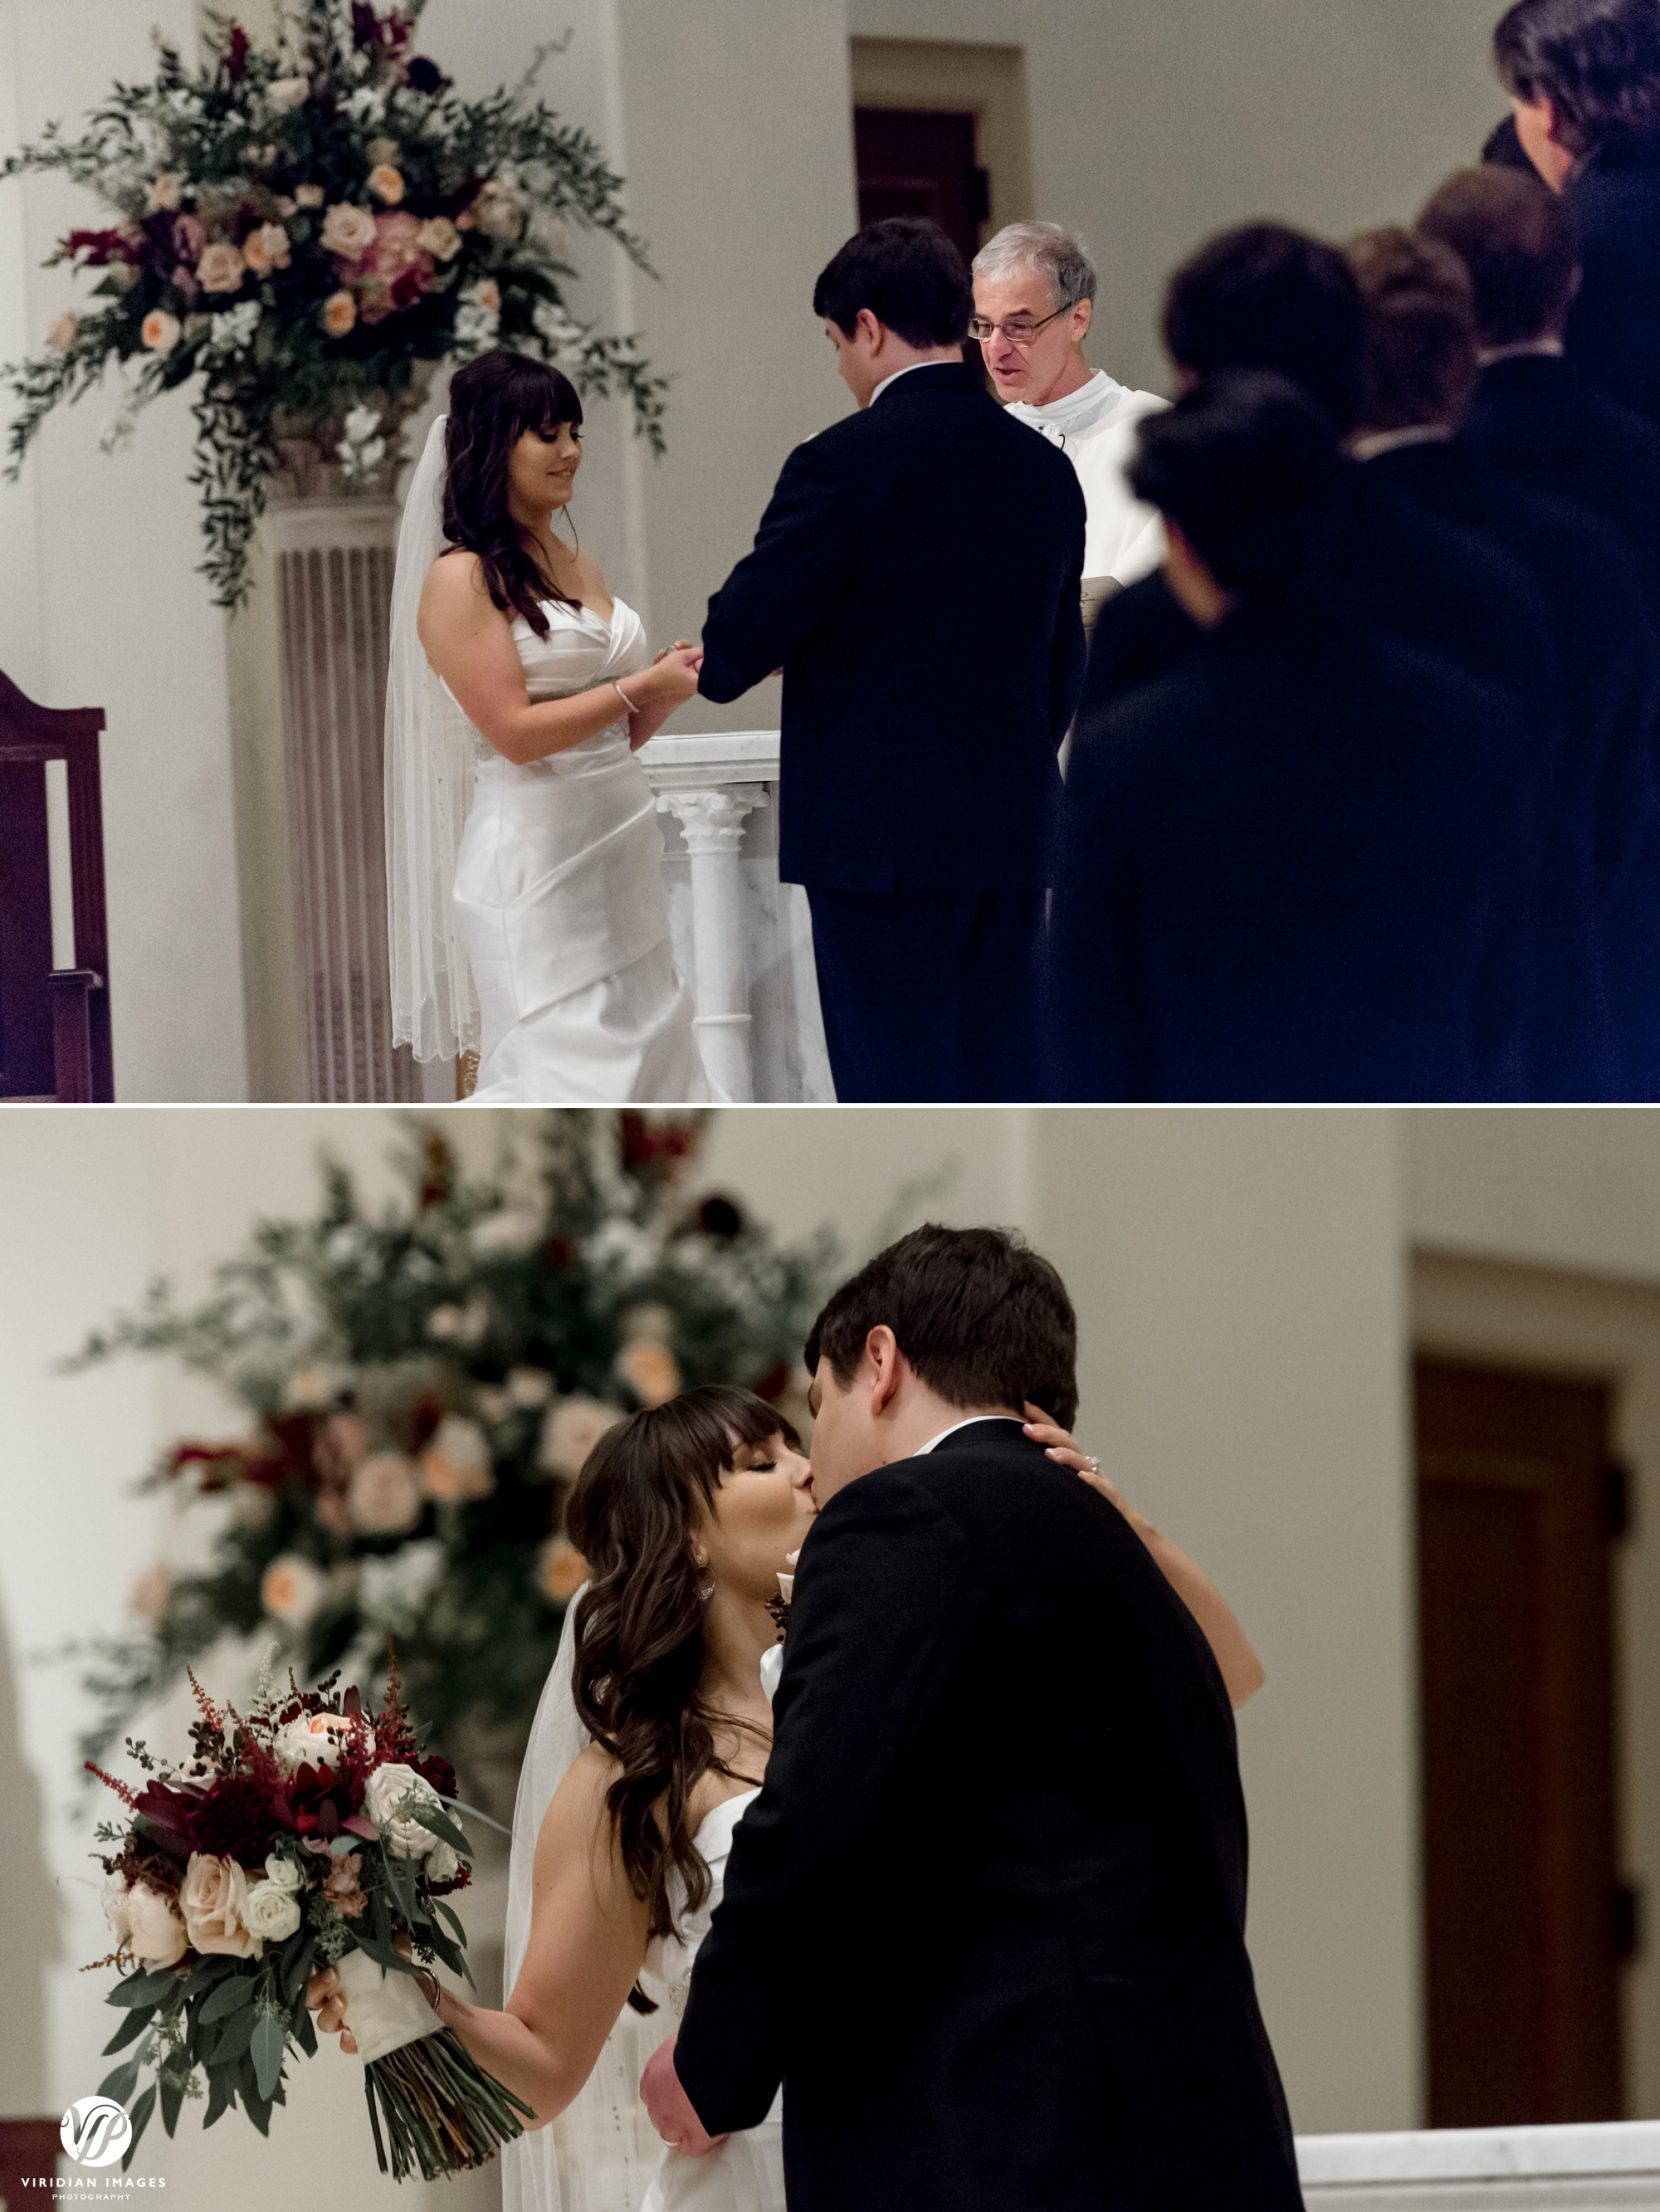 wedding ceremony ring exchange and first kiss